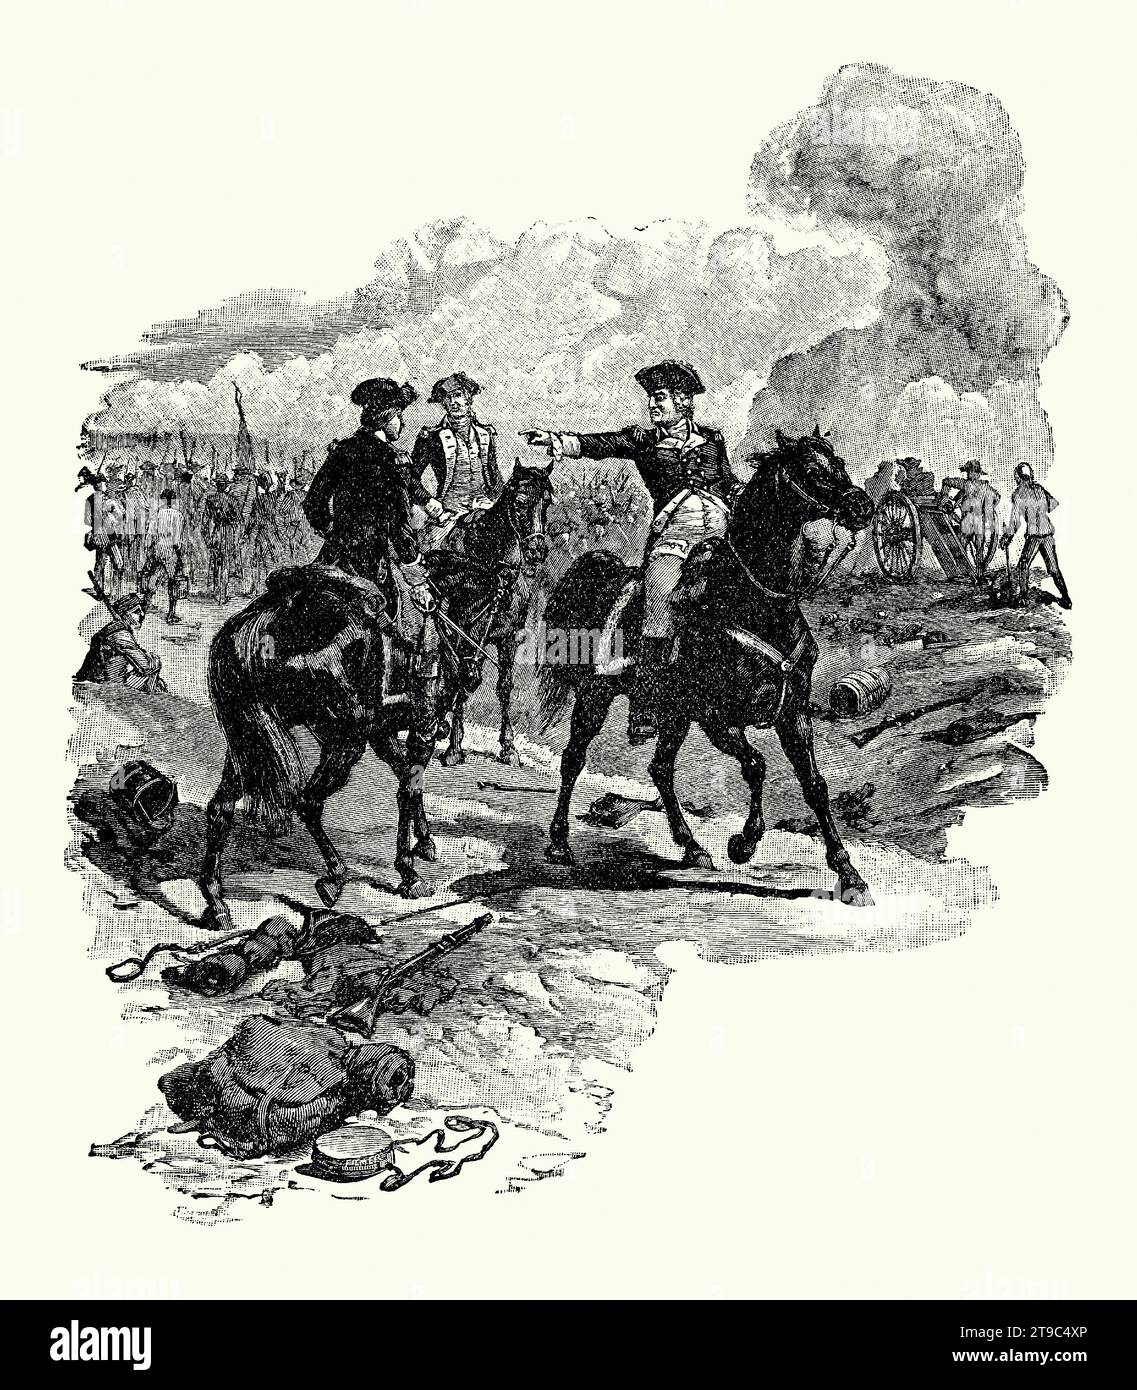 An old engraving showing General George Washington displeased with Major General Charles Lee at the Battle of Monmouth at Freehold, New Jersey, USA on June 28 1778. It was fought during the American Revolutionary War against the British. Washington detached troops under the command of Major General Charles Lee. However, Lee’s decision to retreat did not sit well with Washington. Washington said he would initiate an official inquiry into Lee's conduct. Lee's response demanding a court-martial was deemed insolent and Washington ordered his arrest. Stock Photo